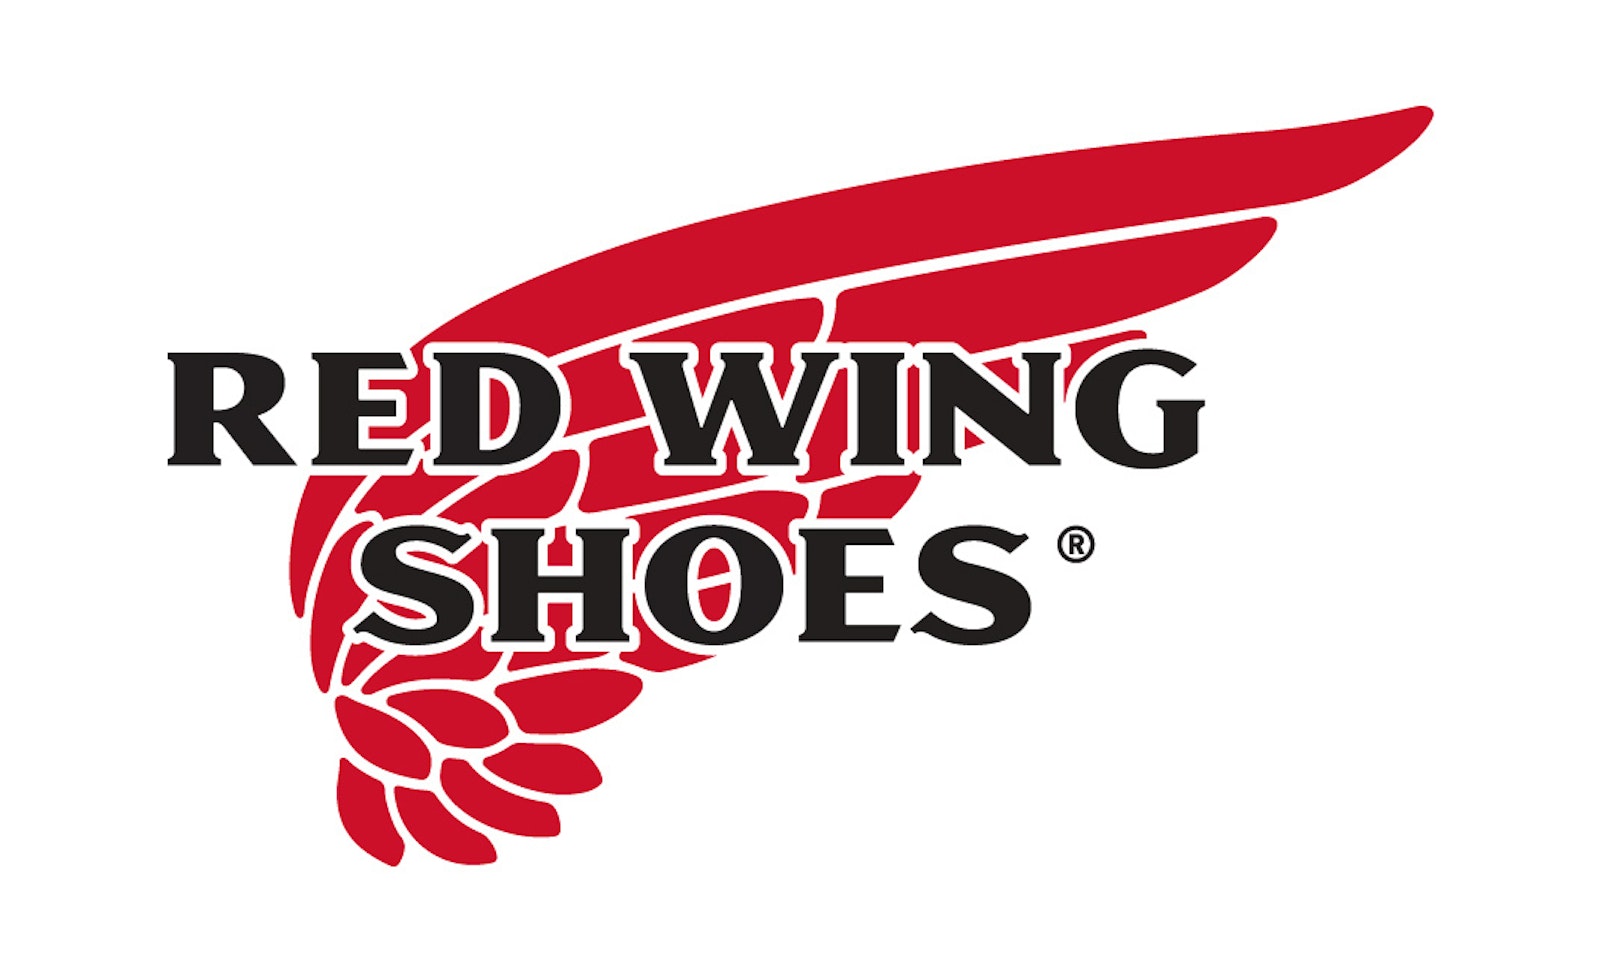 The Red Wing Shoes brand design logo of red wing with type over a white background.